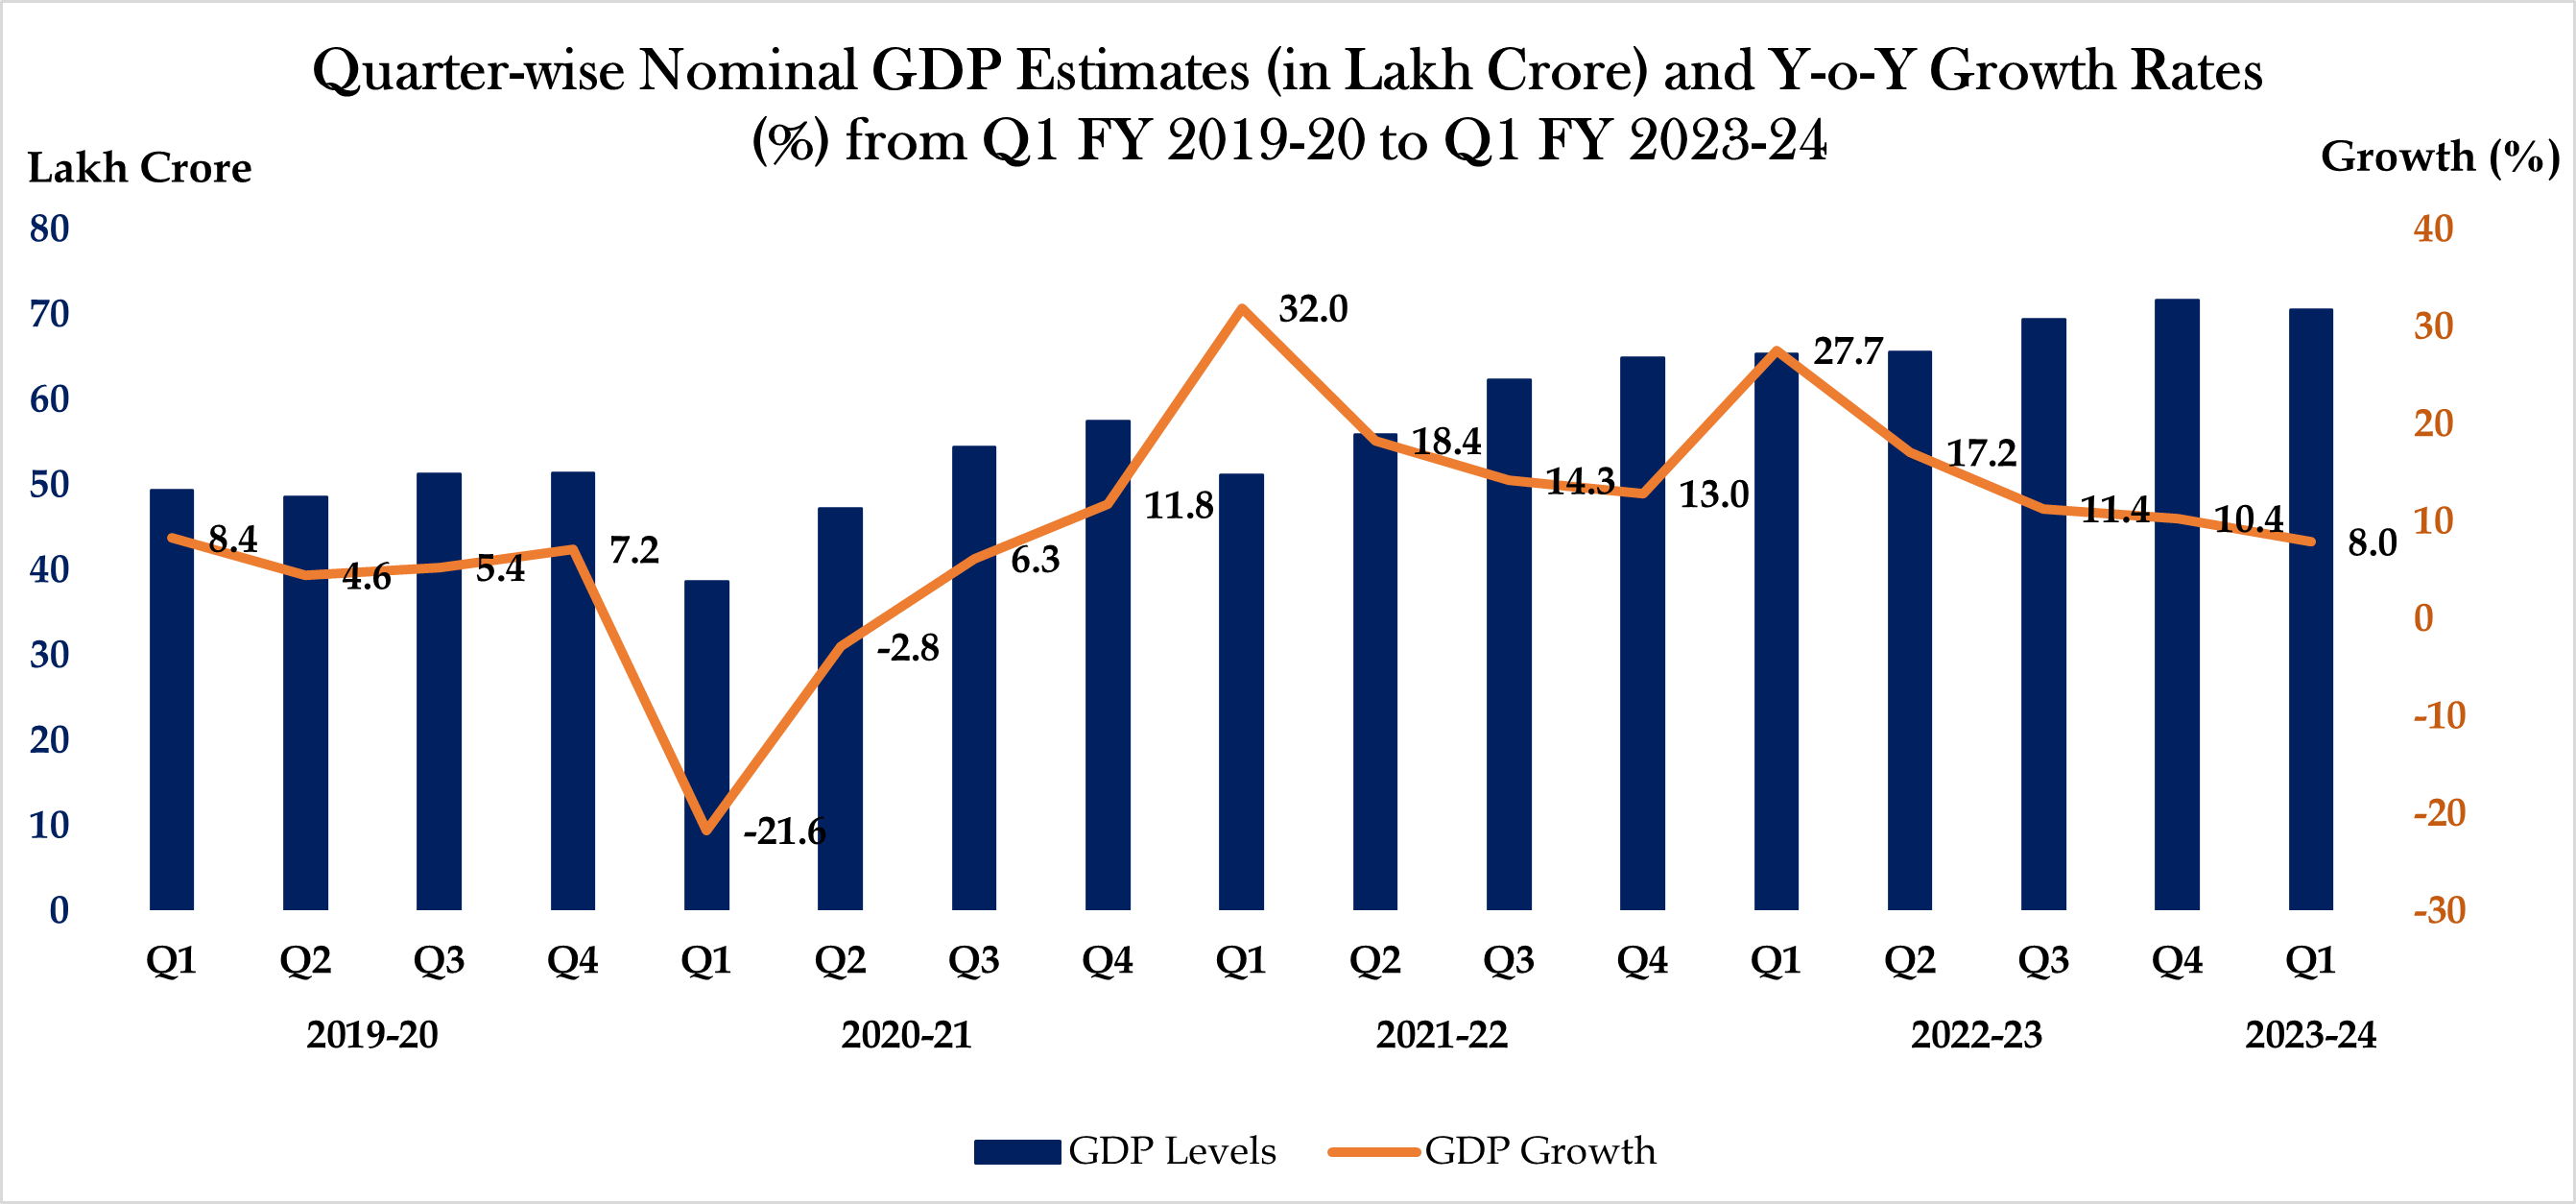 Nominal GDP Growth